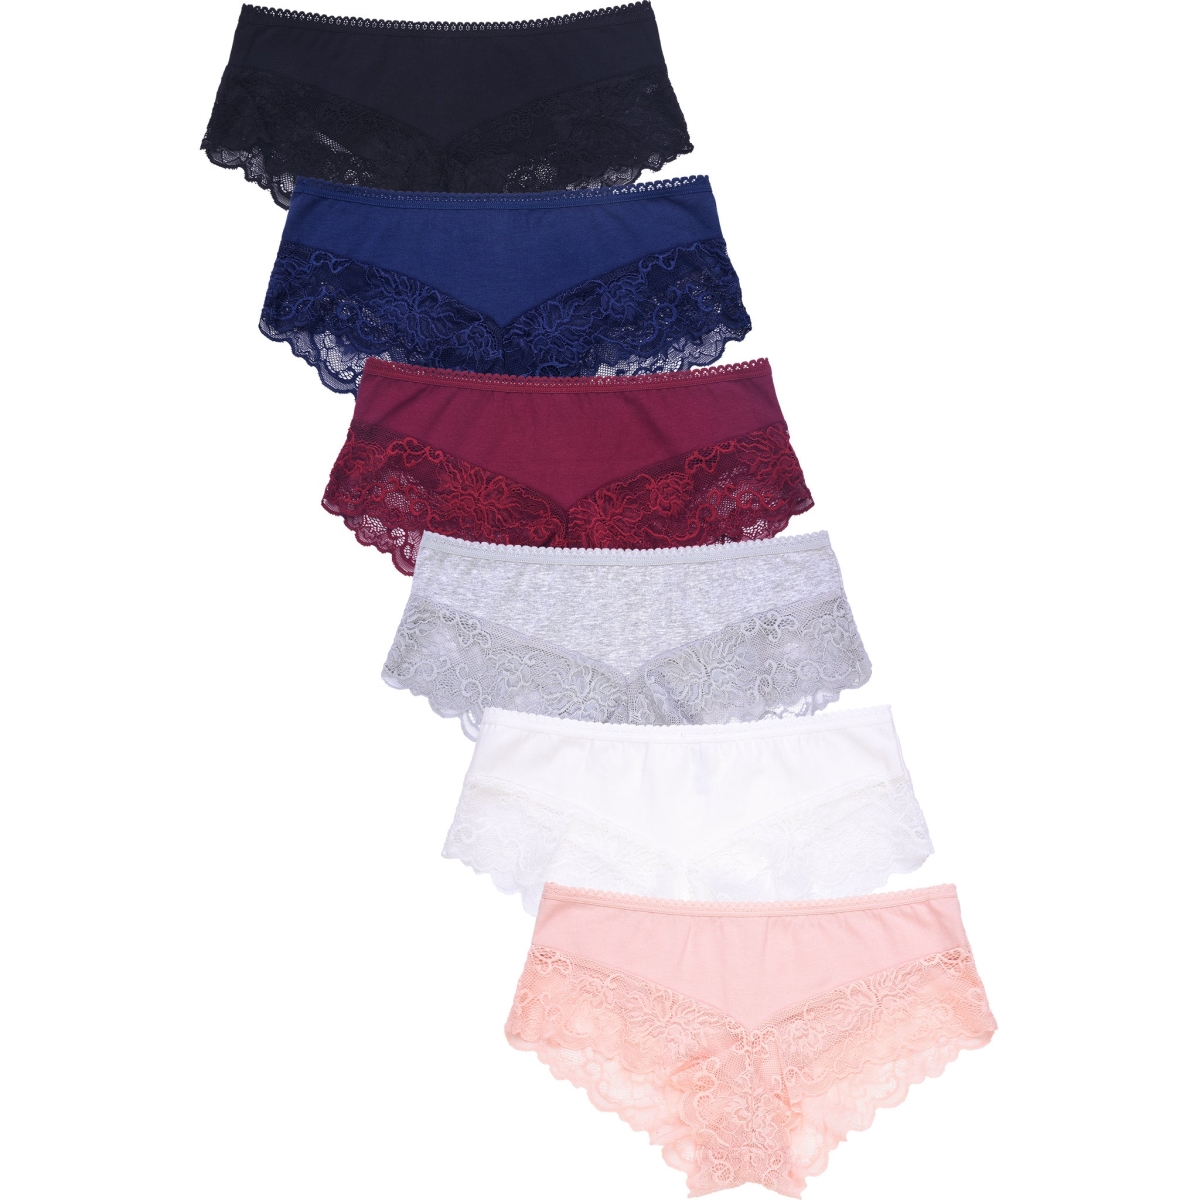 Picture of 247 Frenzy 247-LP1408CH2-MD Womens Essentials Cotton Stretch Hipster Panty Underwear - Assorted Color - Medium - Pack of 6